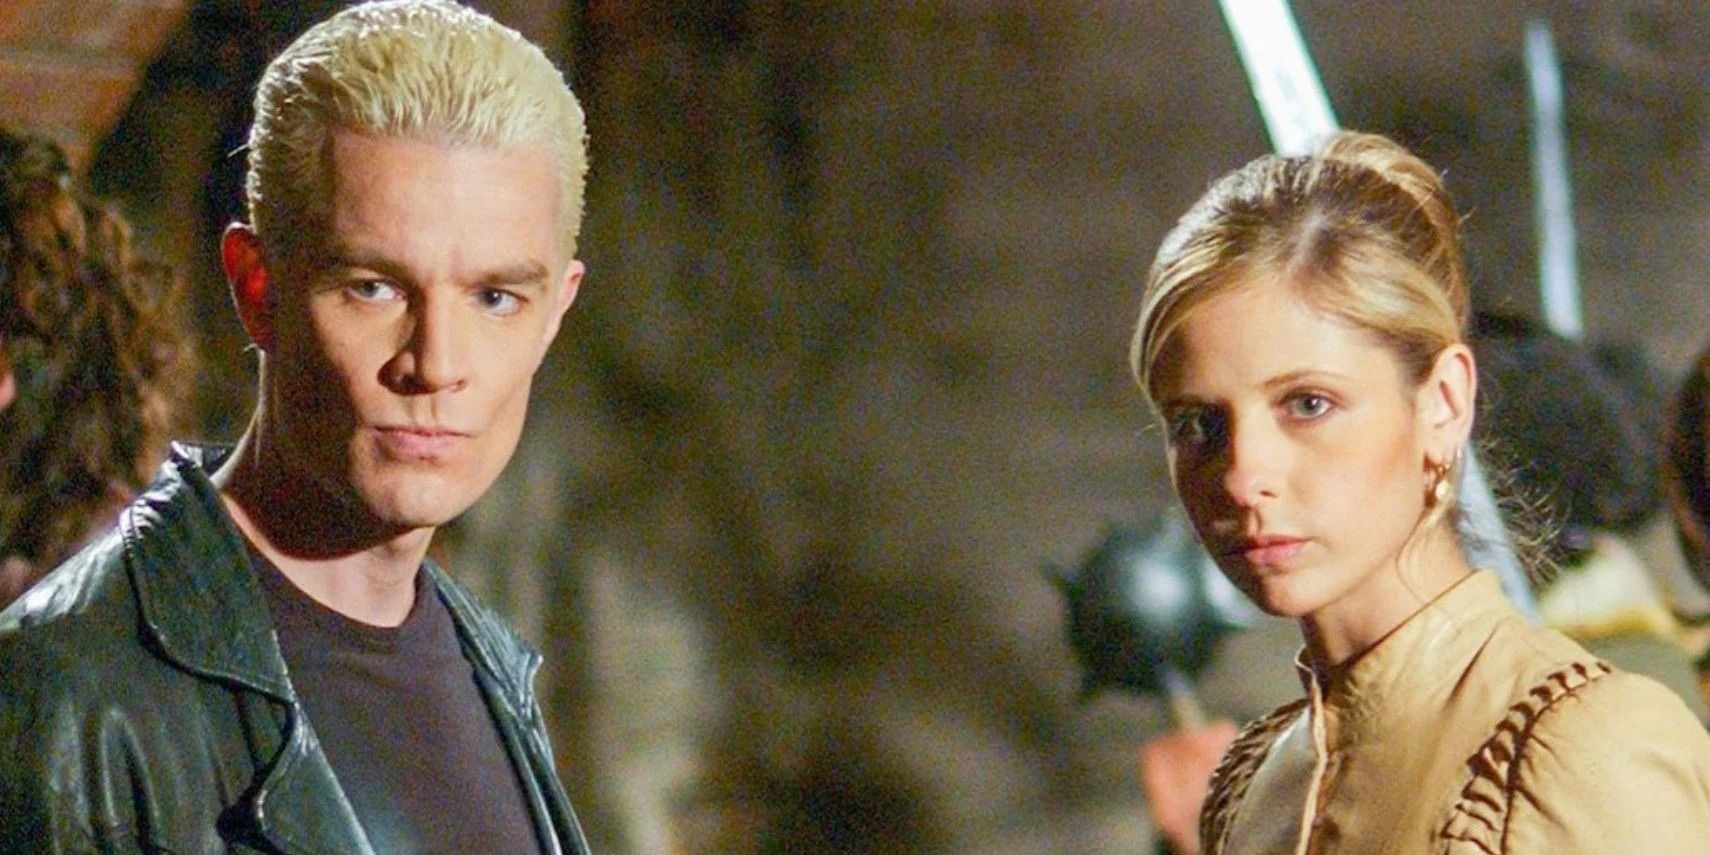 Buffy the Vampire Slayer's Spike actor teases epic return to show